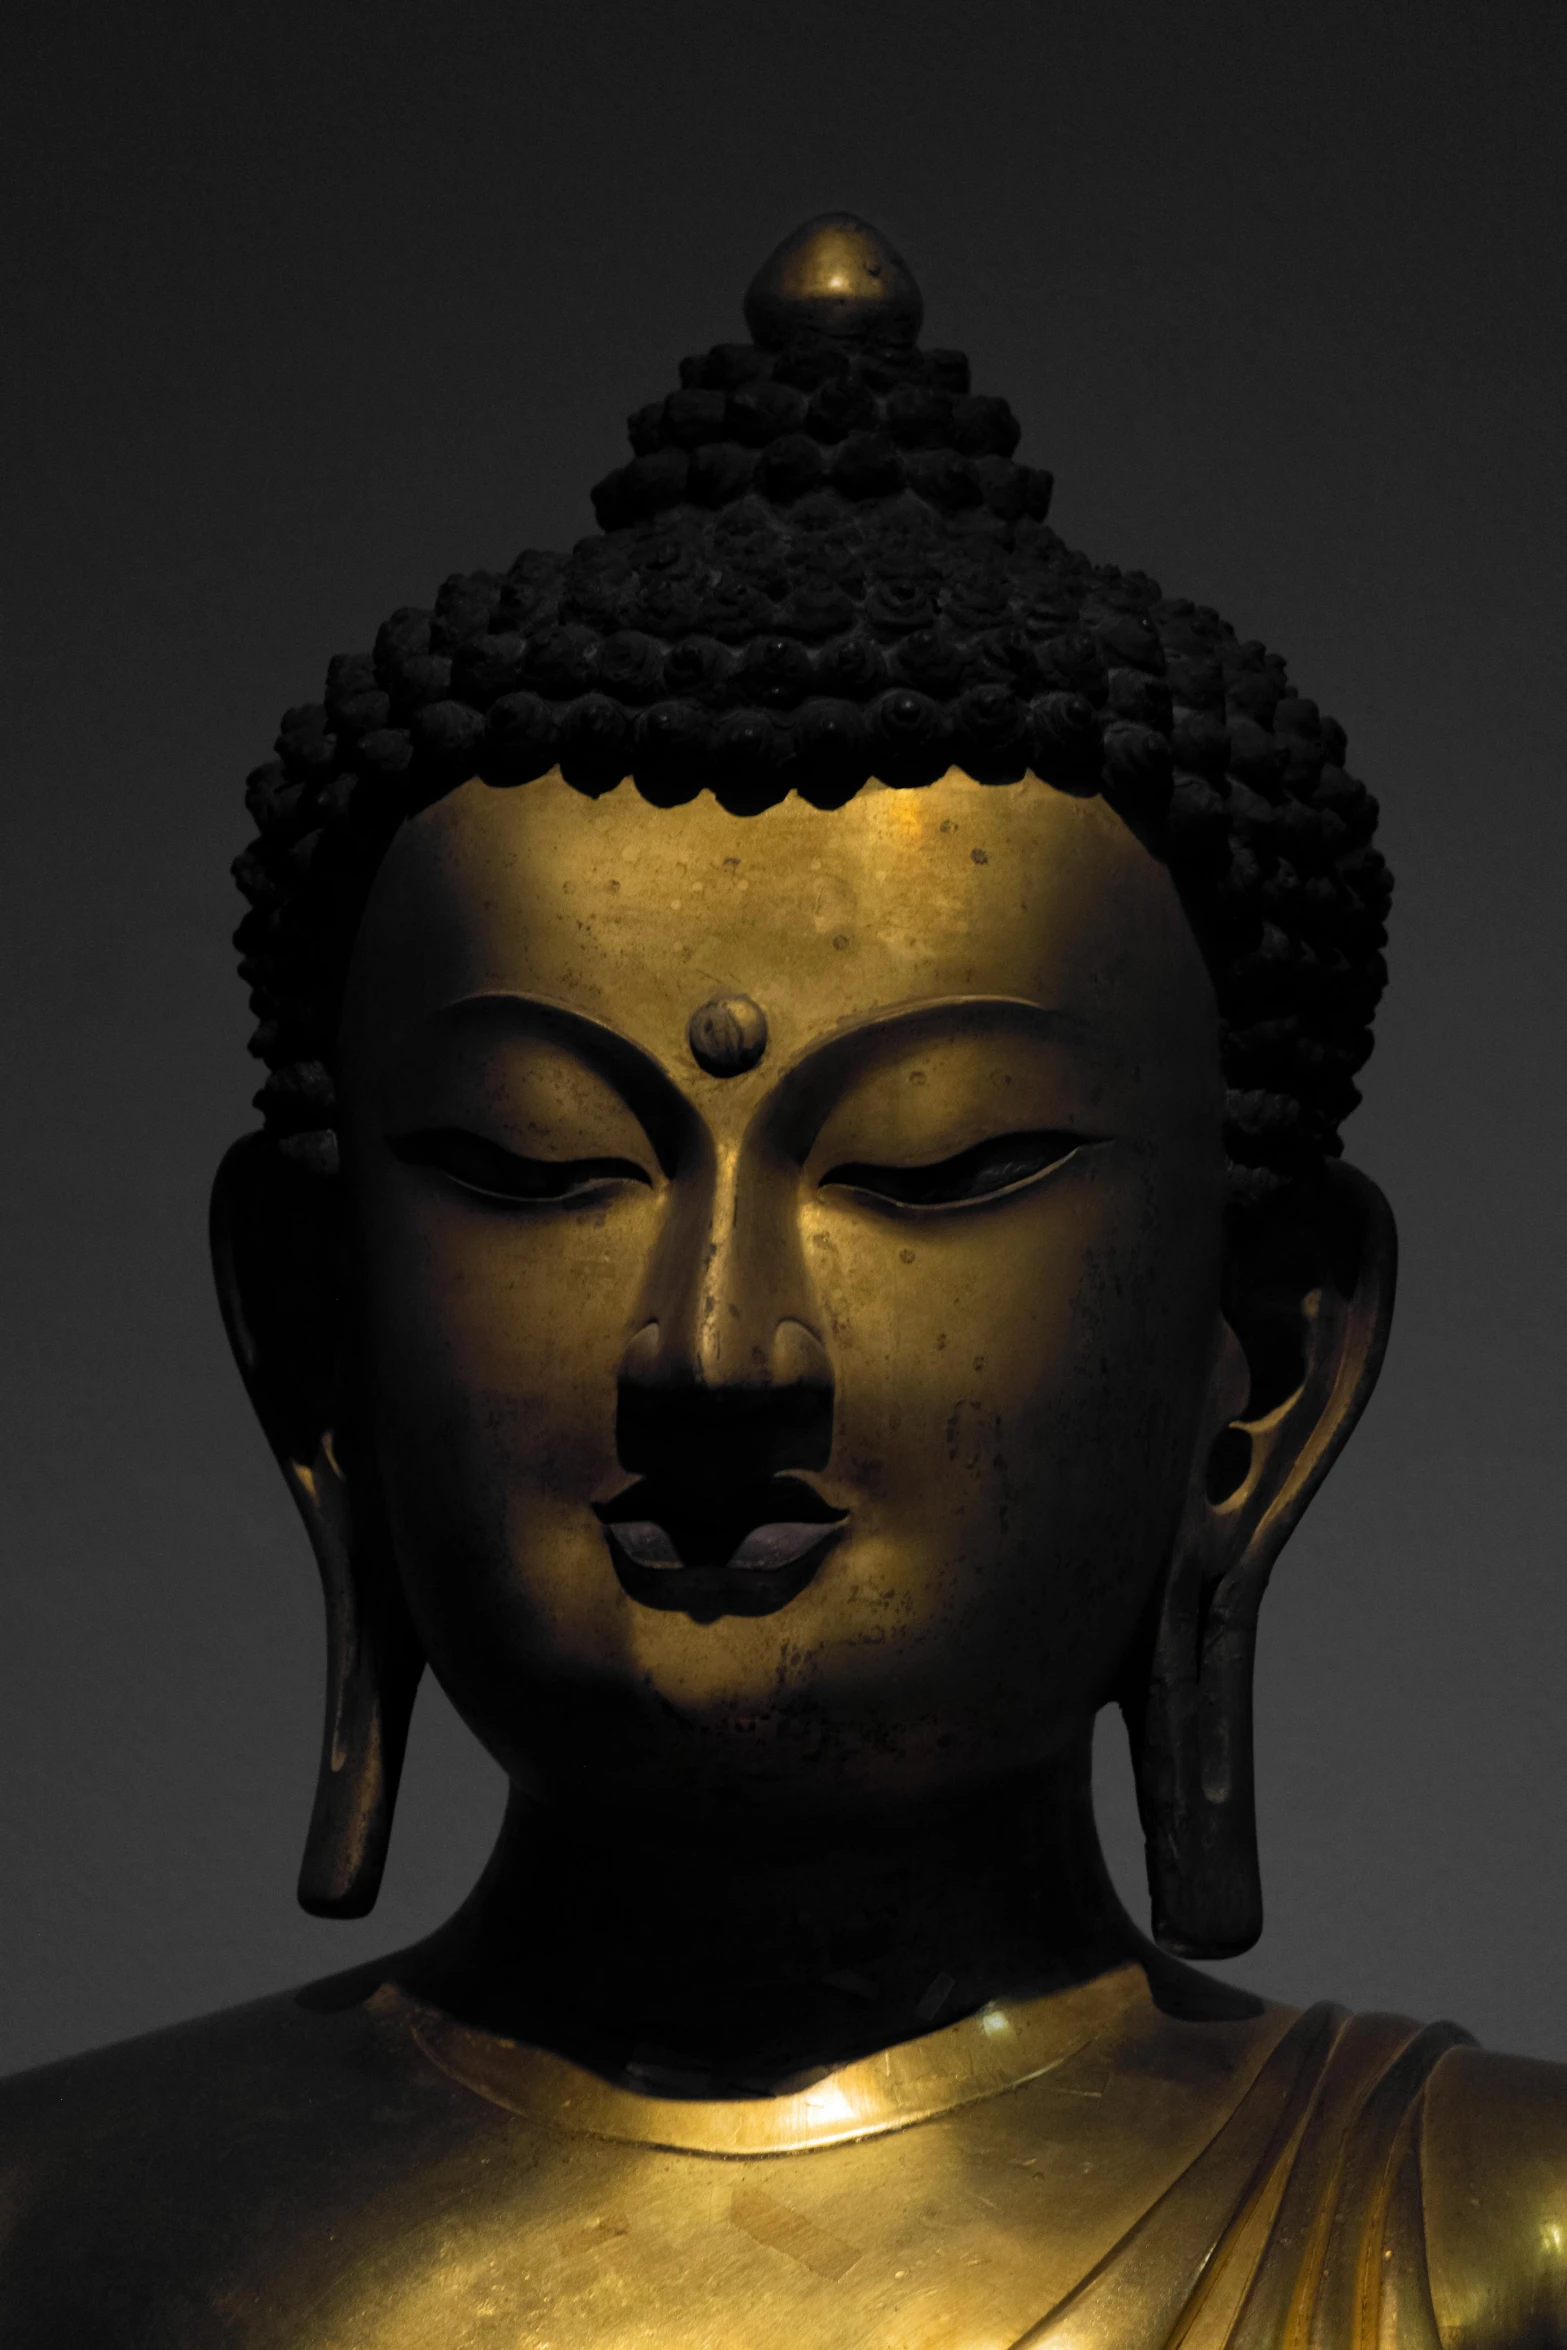 an image of a buddha statue with a black background